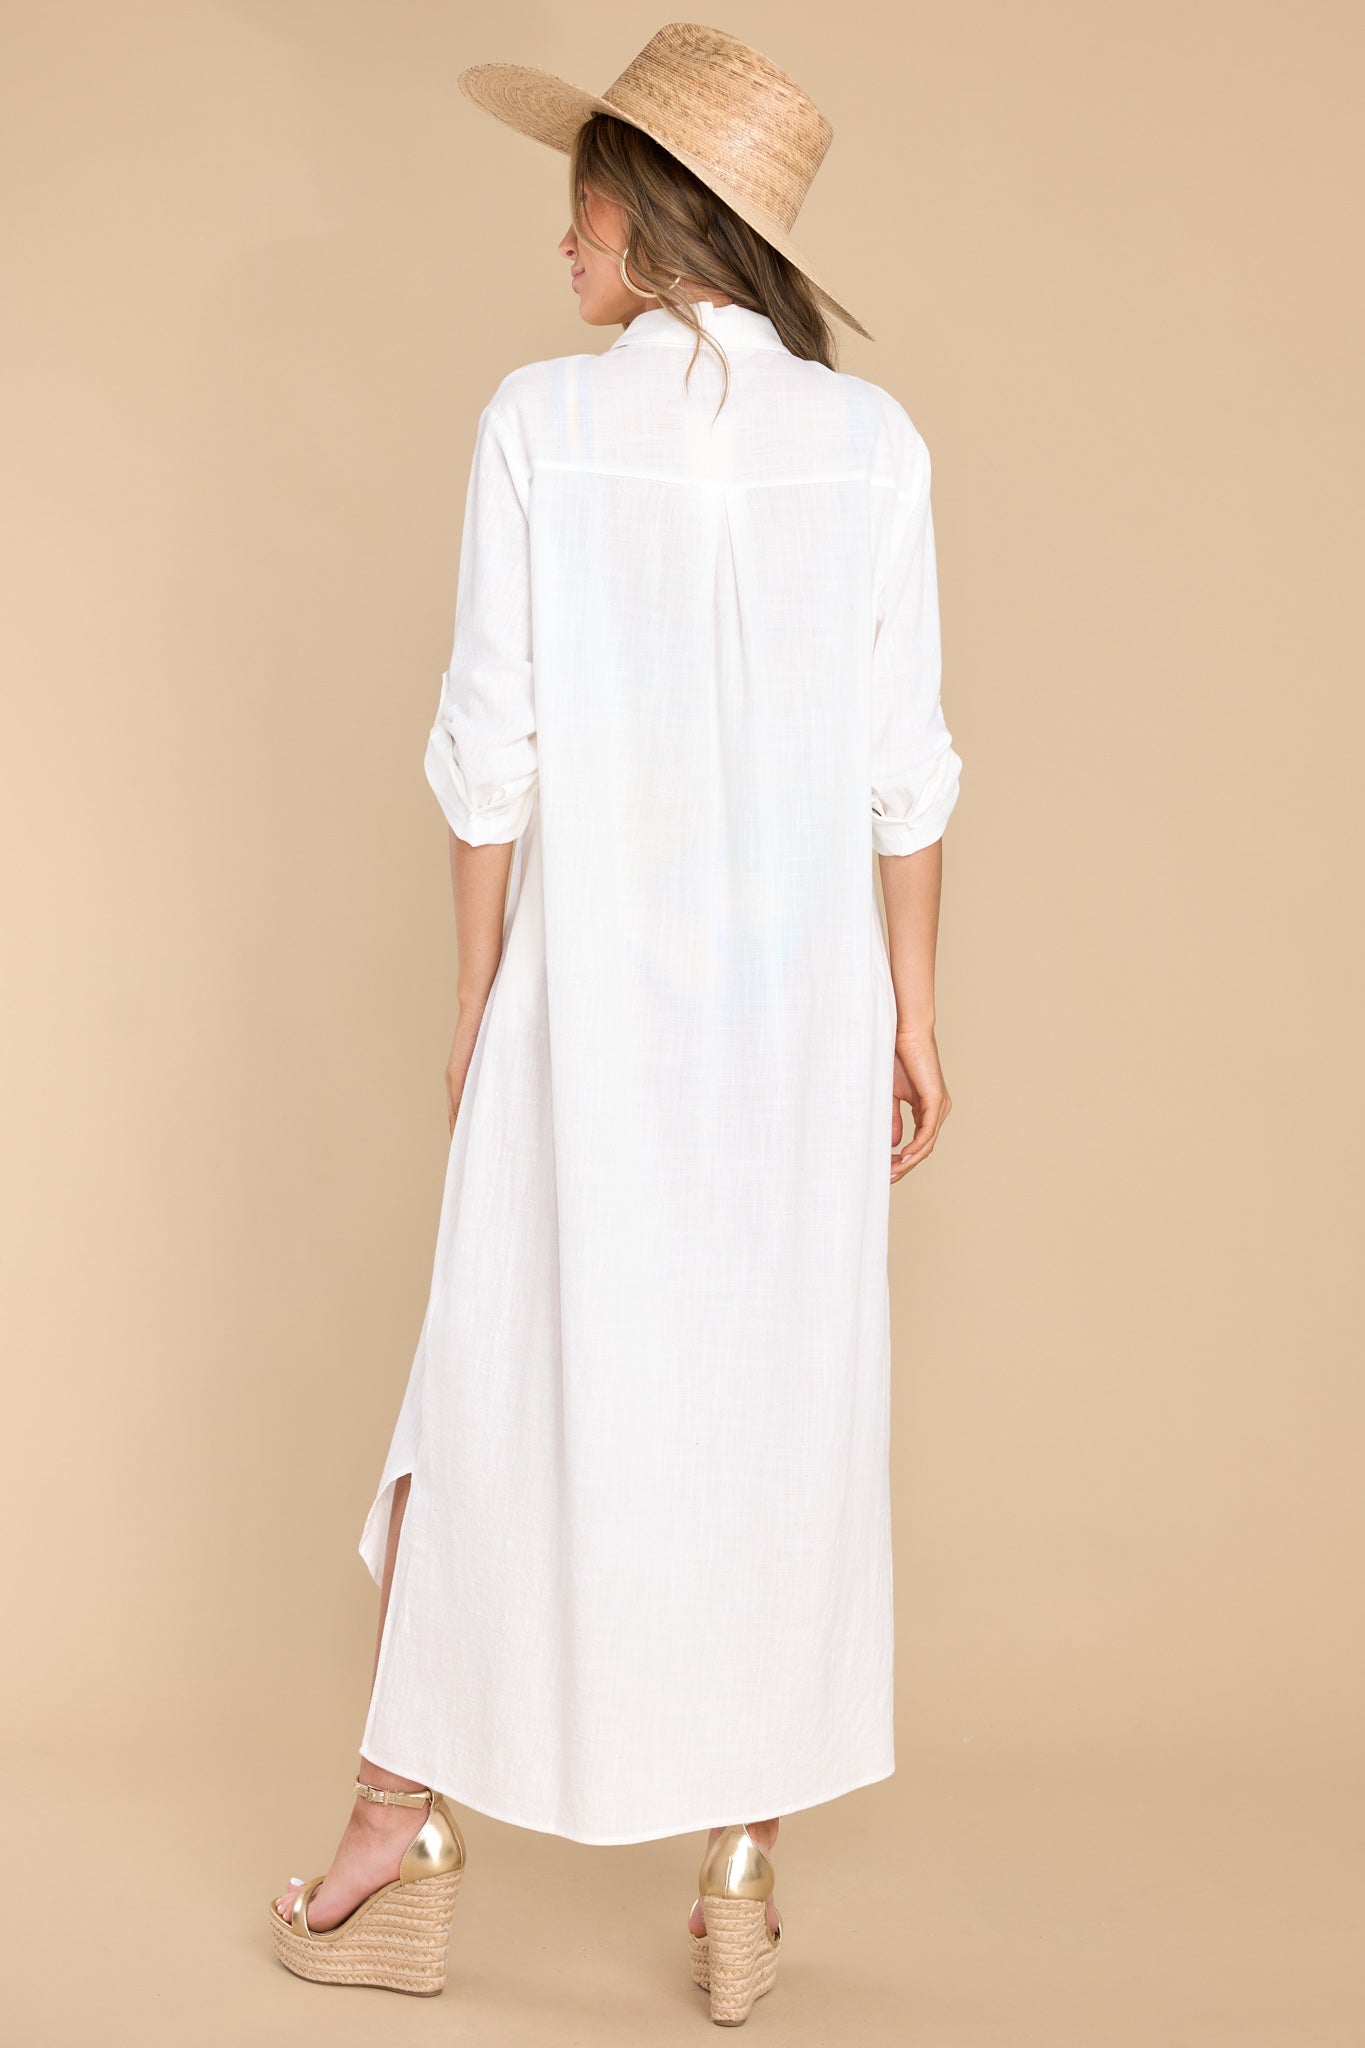 Relaxed Romance Ivory Maxi Dress - Red Dress